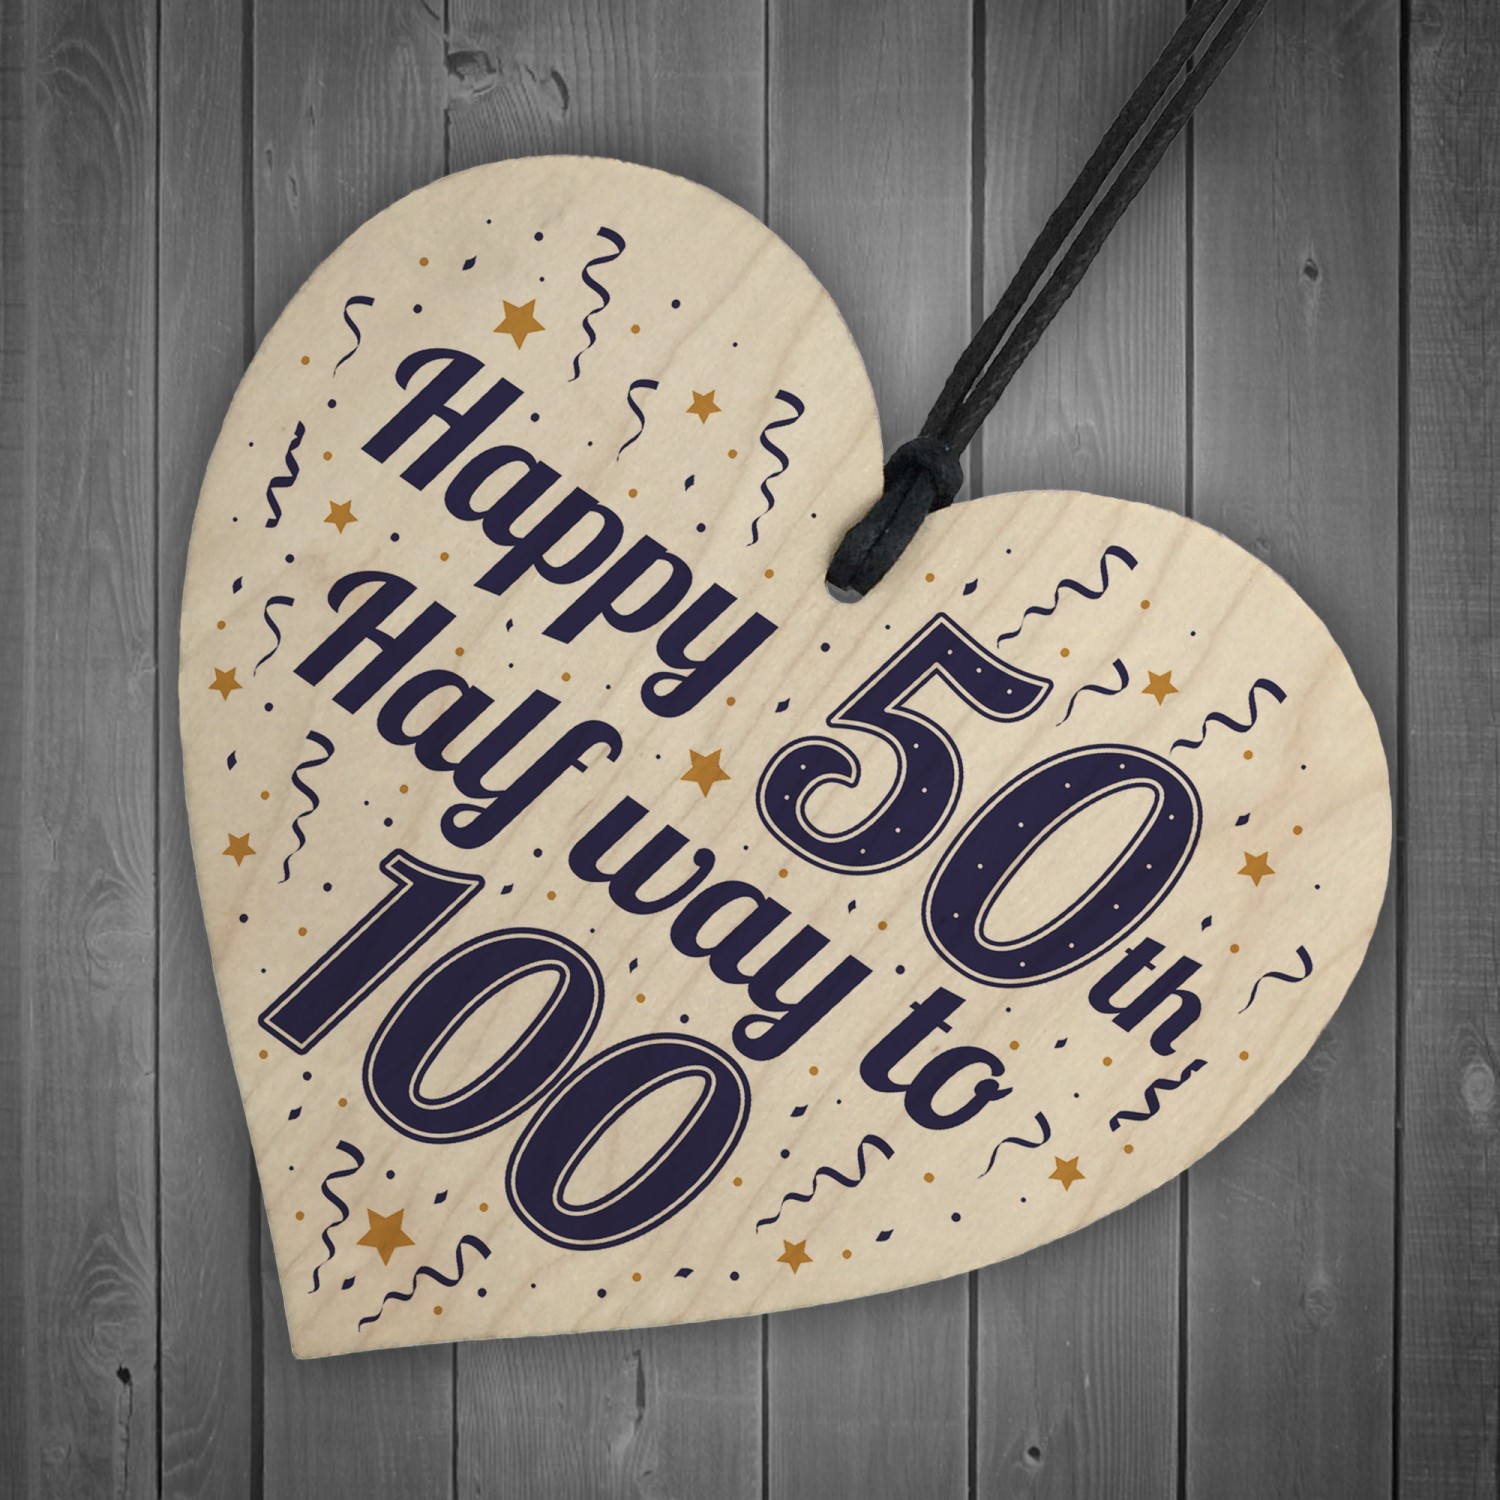 Funny Hot Flushes Wooden Decorative Heart 50th Birthday Gift Plaque w13